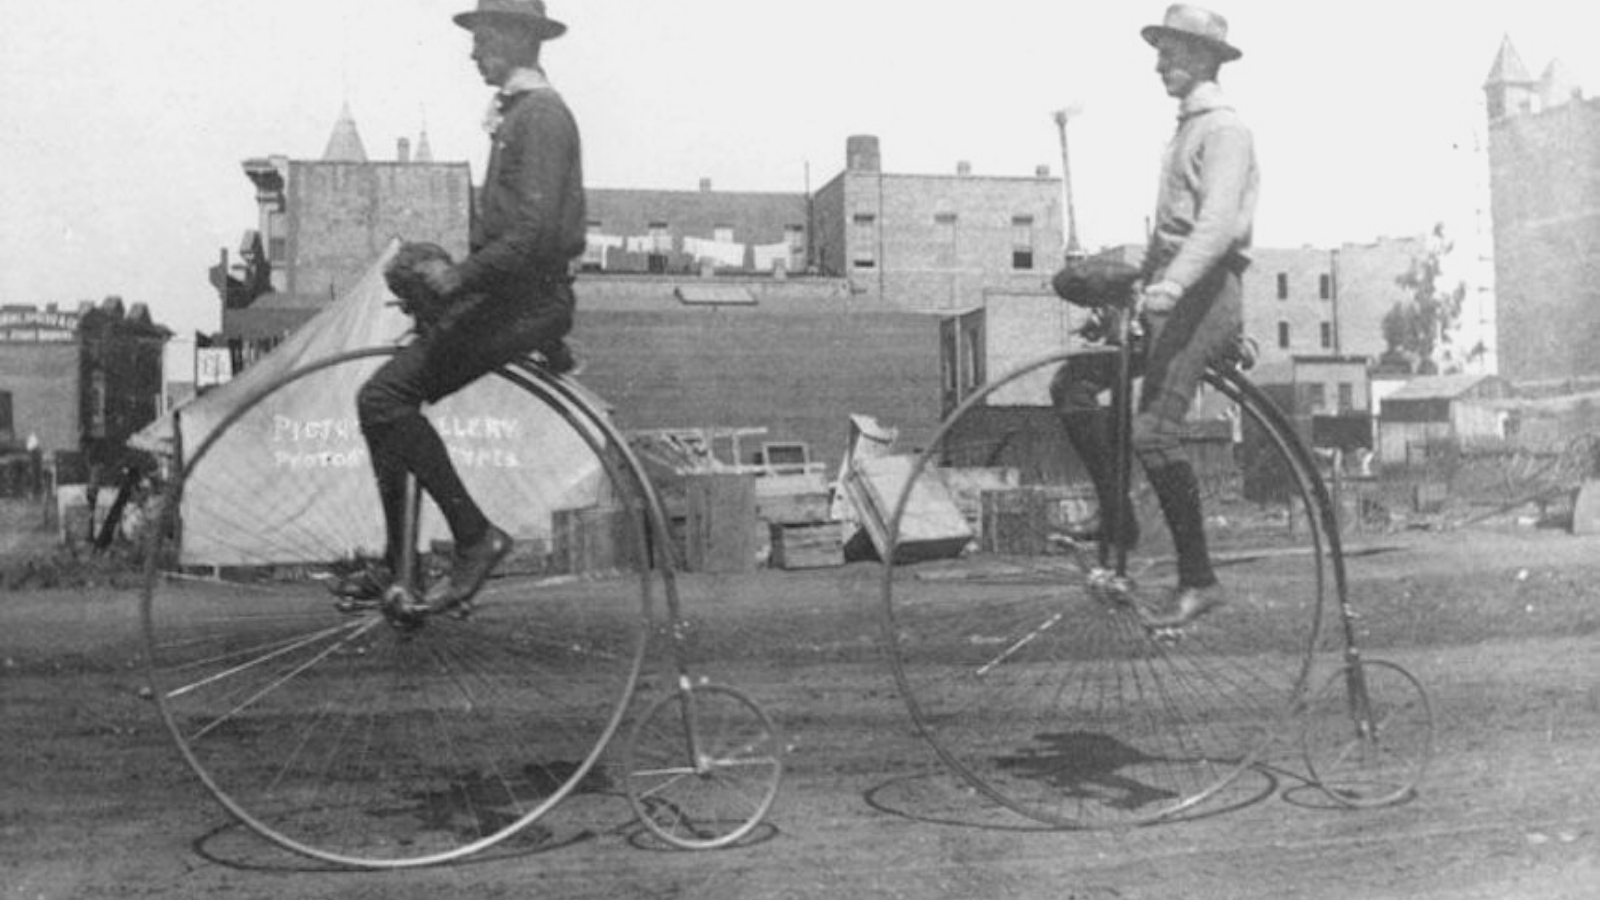 Learn more about the funny named penny farthing bicycle on Peloton&Tales, the home of great cycling stories